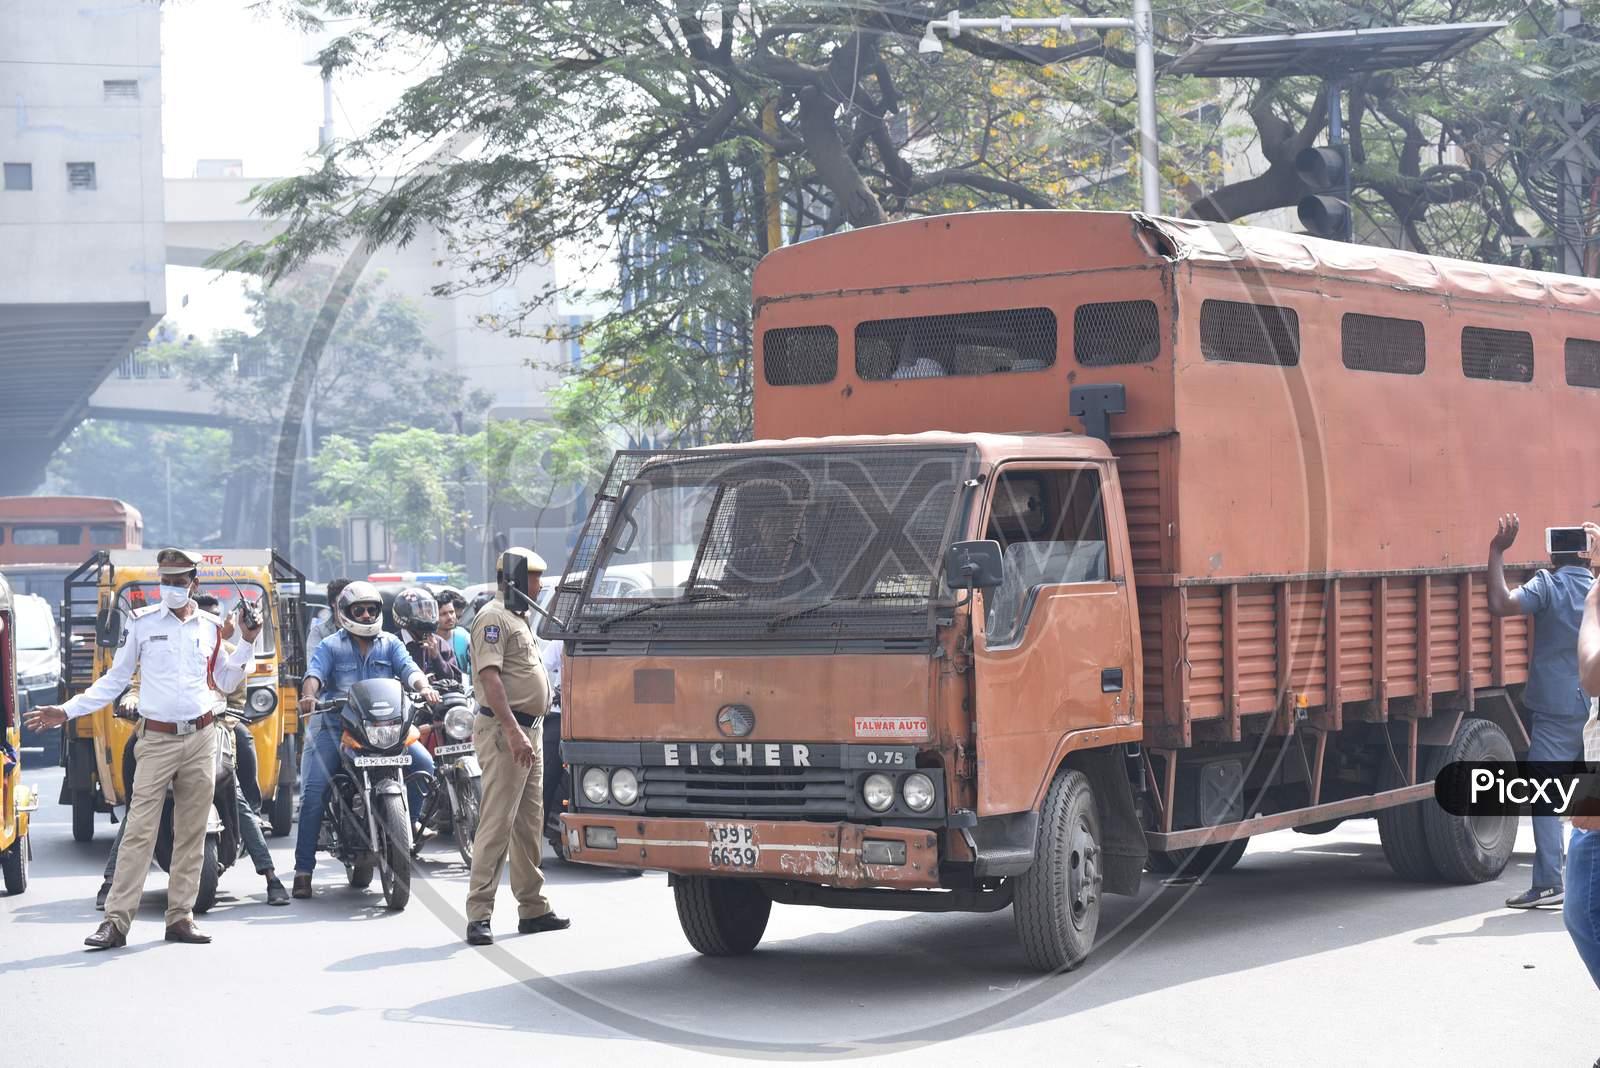 Detained protesters carrying in vehicles by Hyderabad Police who is protesting against Citizenship Amendmend Act at Exhibition Grounds on 19,December 2019.